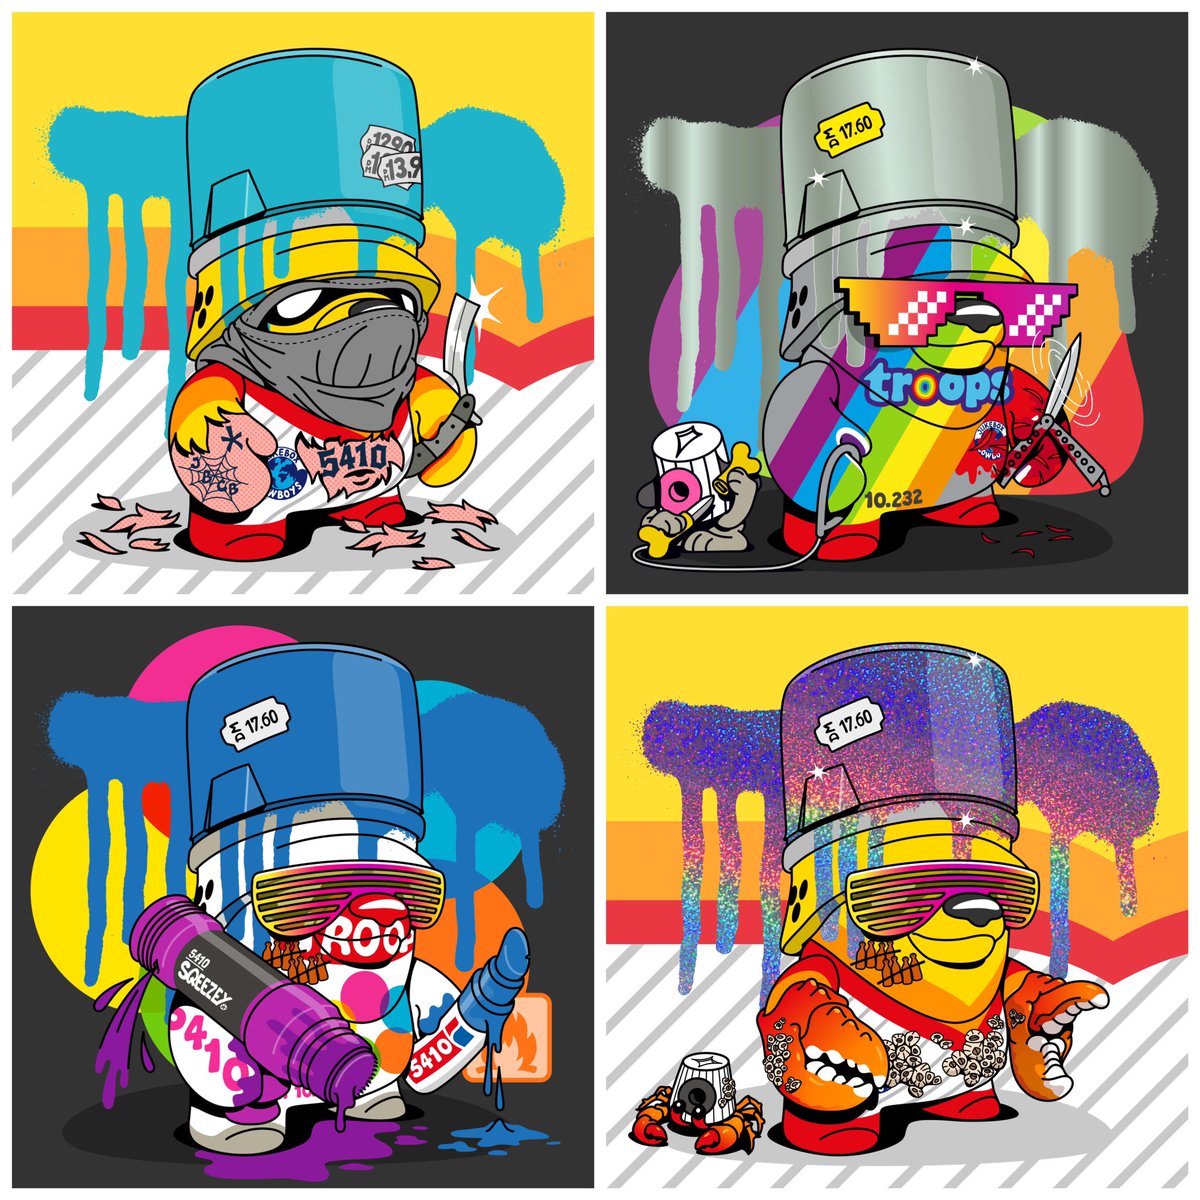 Time celebrate the weekend and my favorite @TeddyTroops shape: Spraycan Cap. Hit me up if one of you 10 people seeing this tweet got a Spraycan Cap to trade! #nft #art #cardano #spraycan